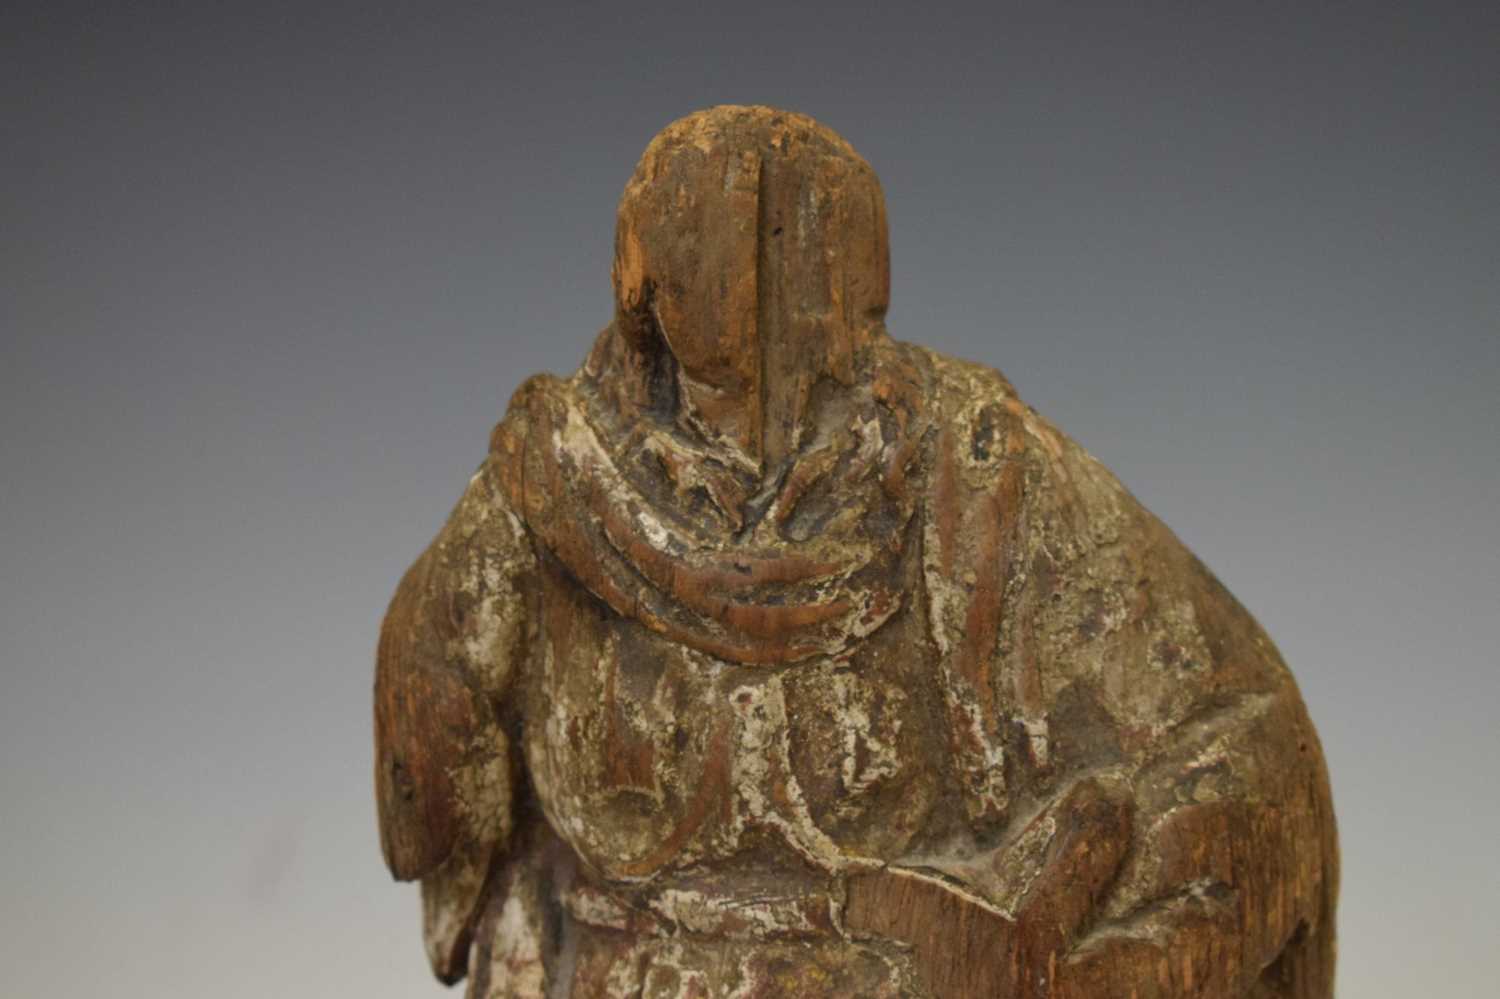 Weathered carving of a figure in robes, possible 16th/17th century - Image 3 of 8